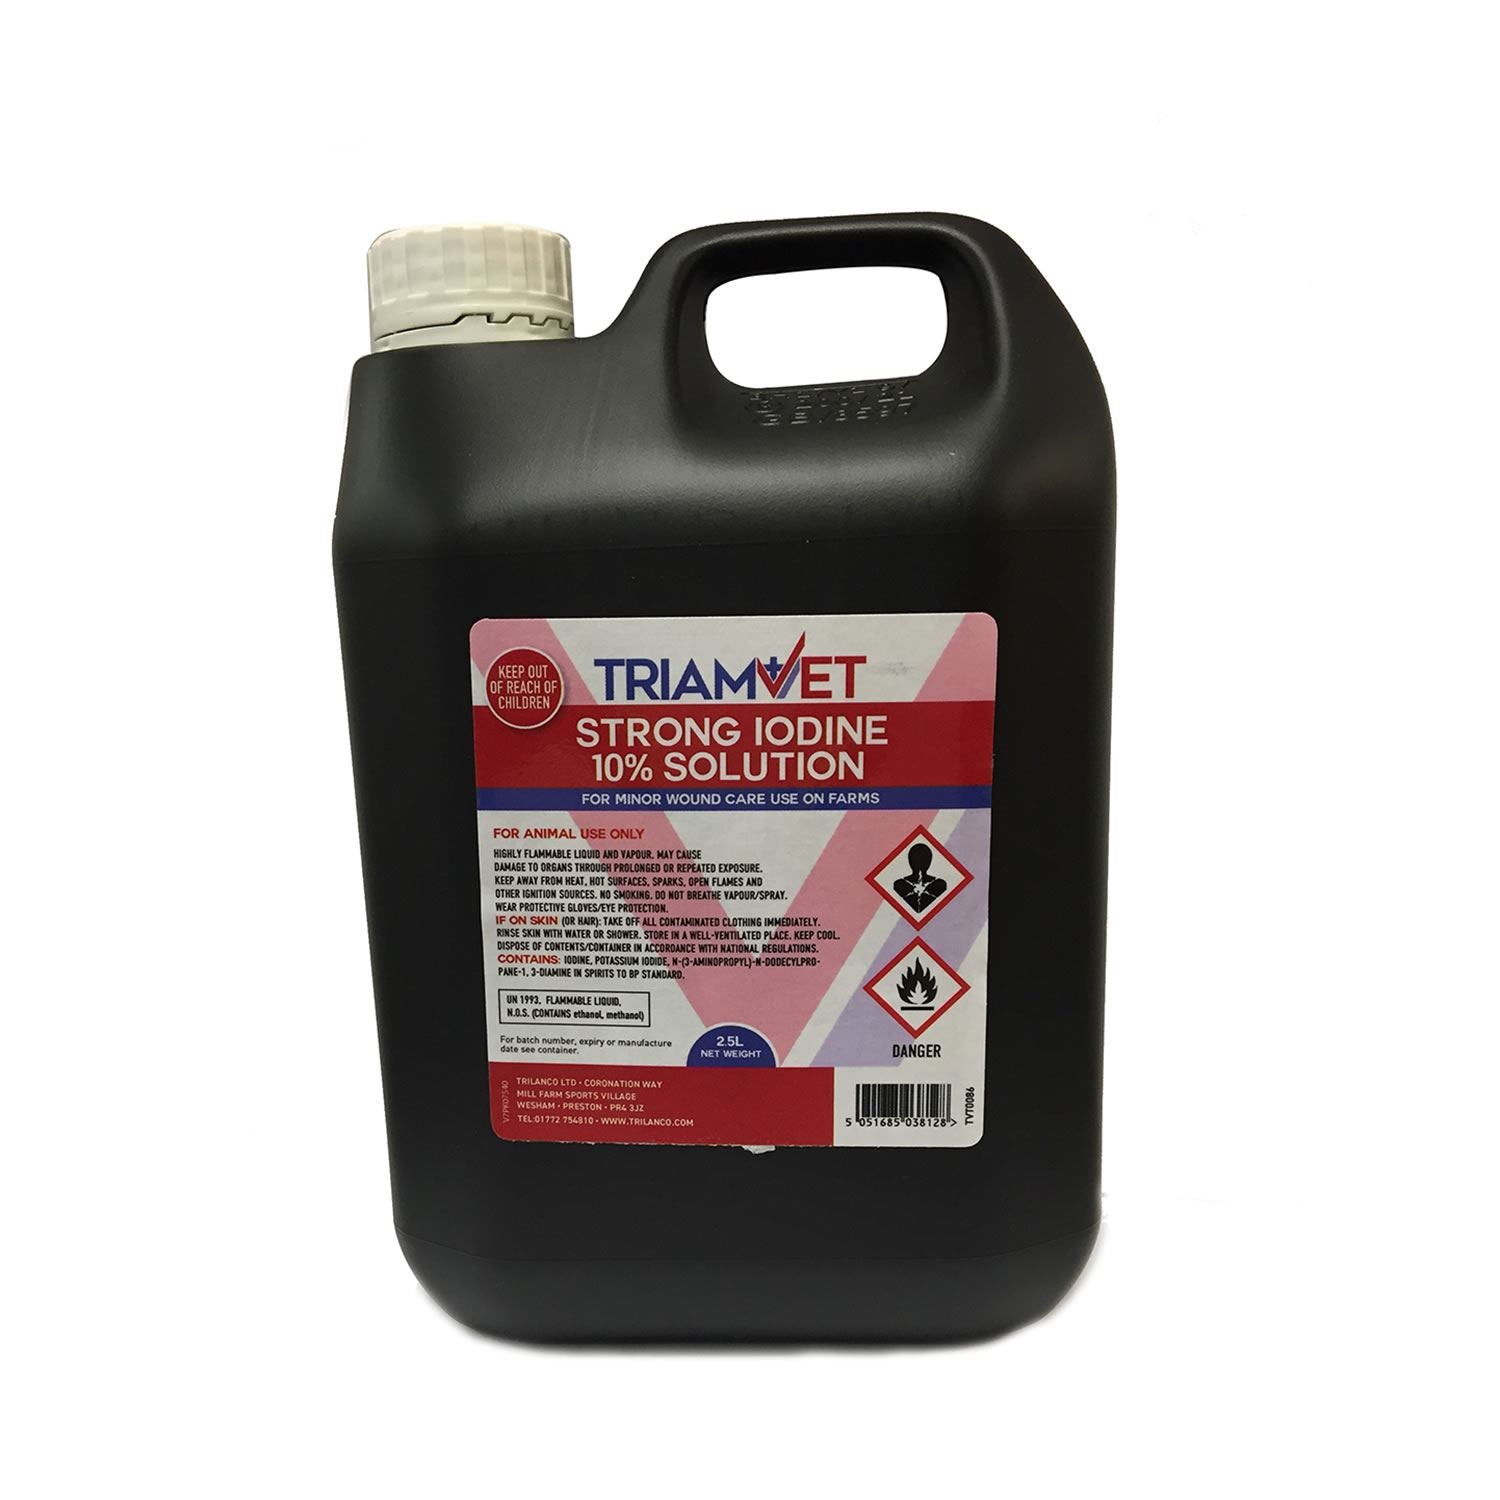 Triamvet Strong Iodine 10% Solution - Just Horse Riders